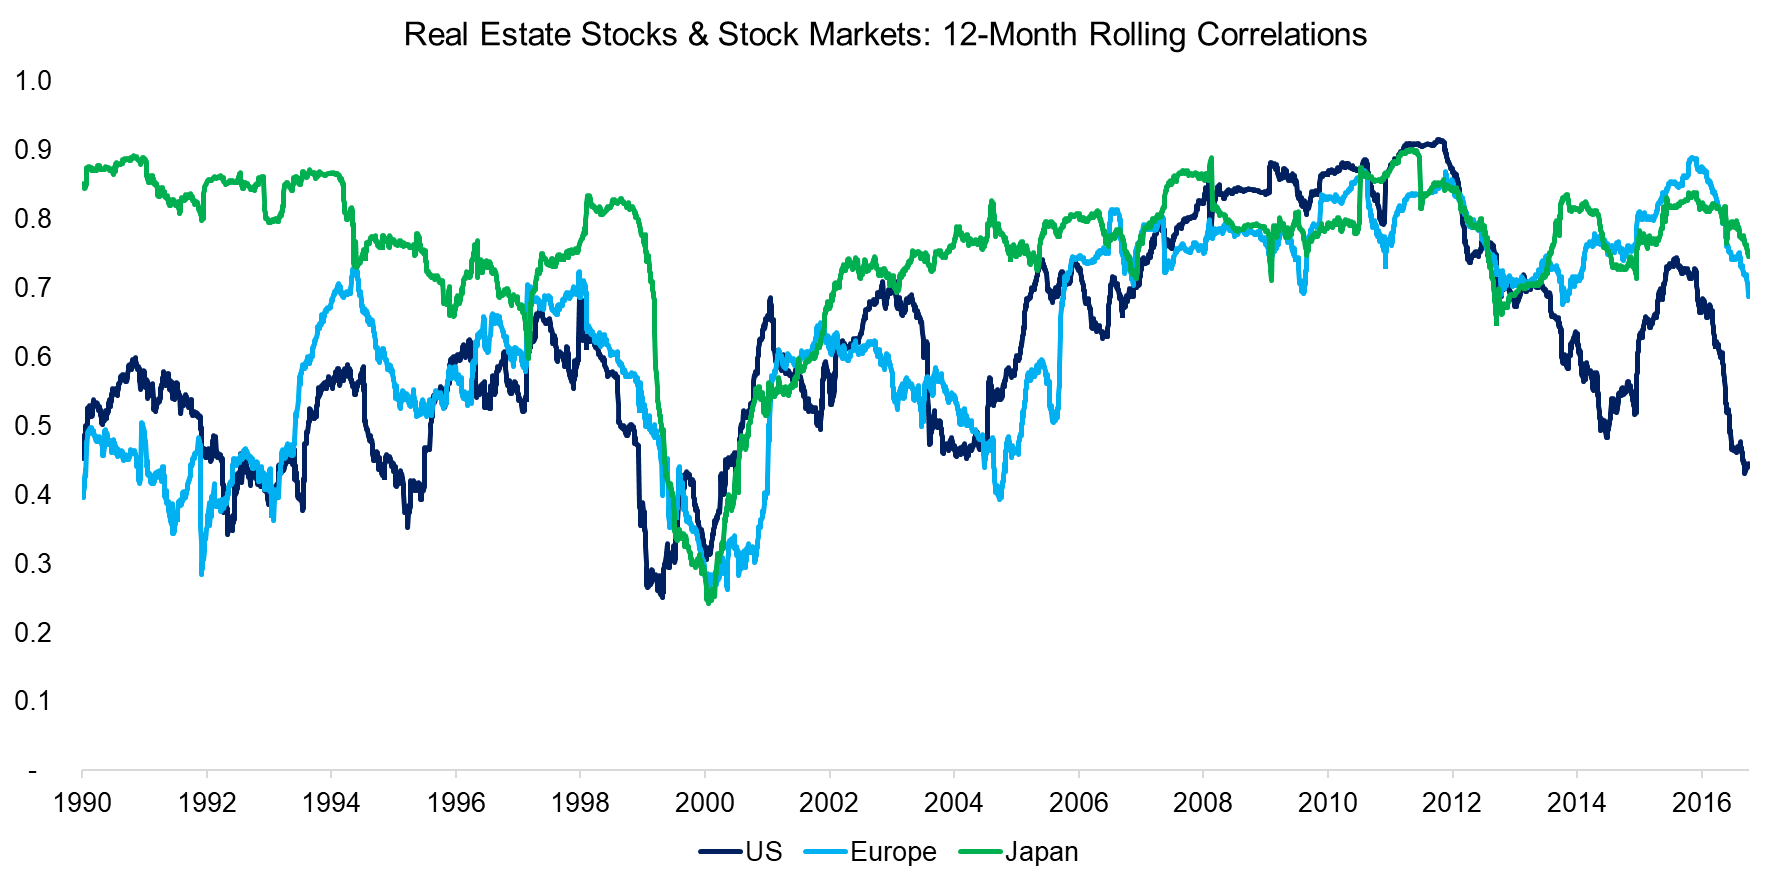 Real Estate Stocks & Stock Markets 12-Month Rolling Correlations